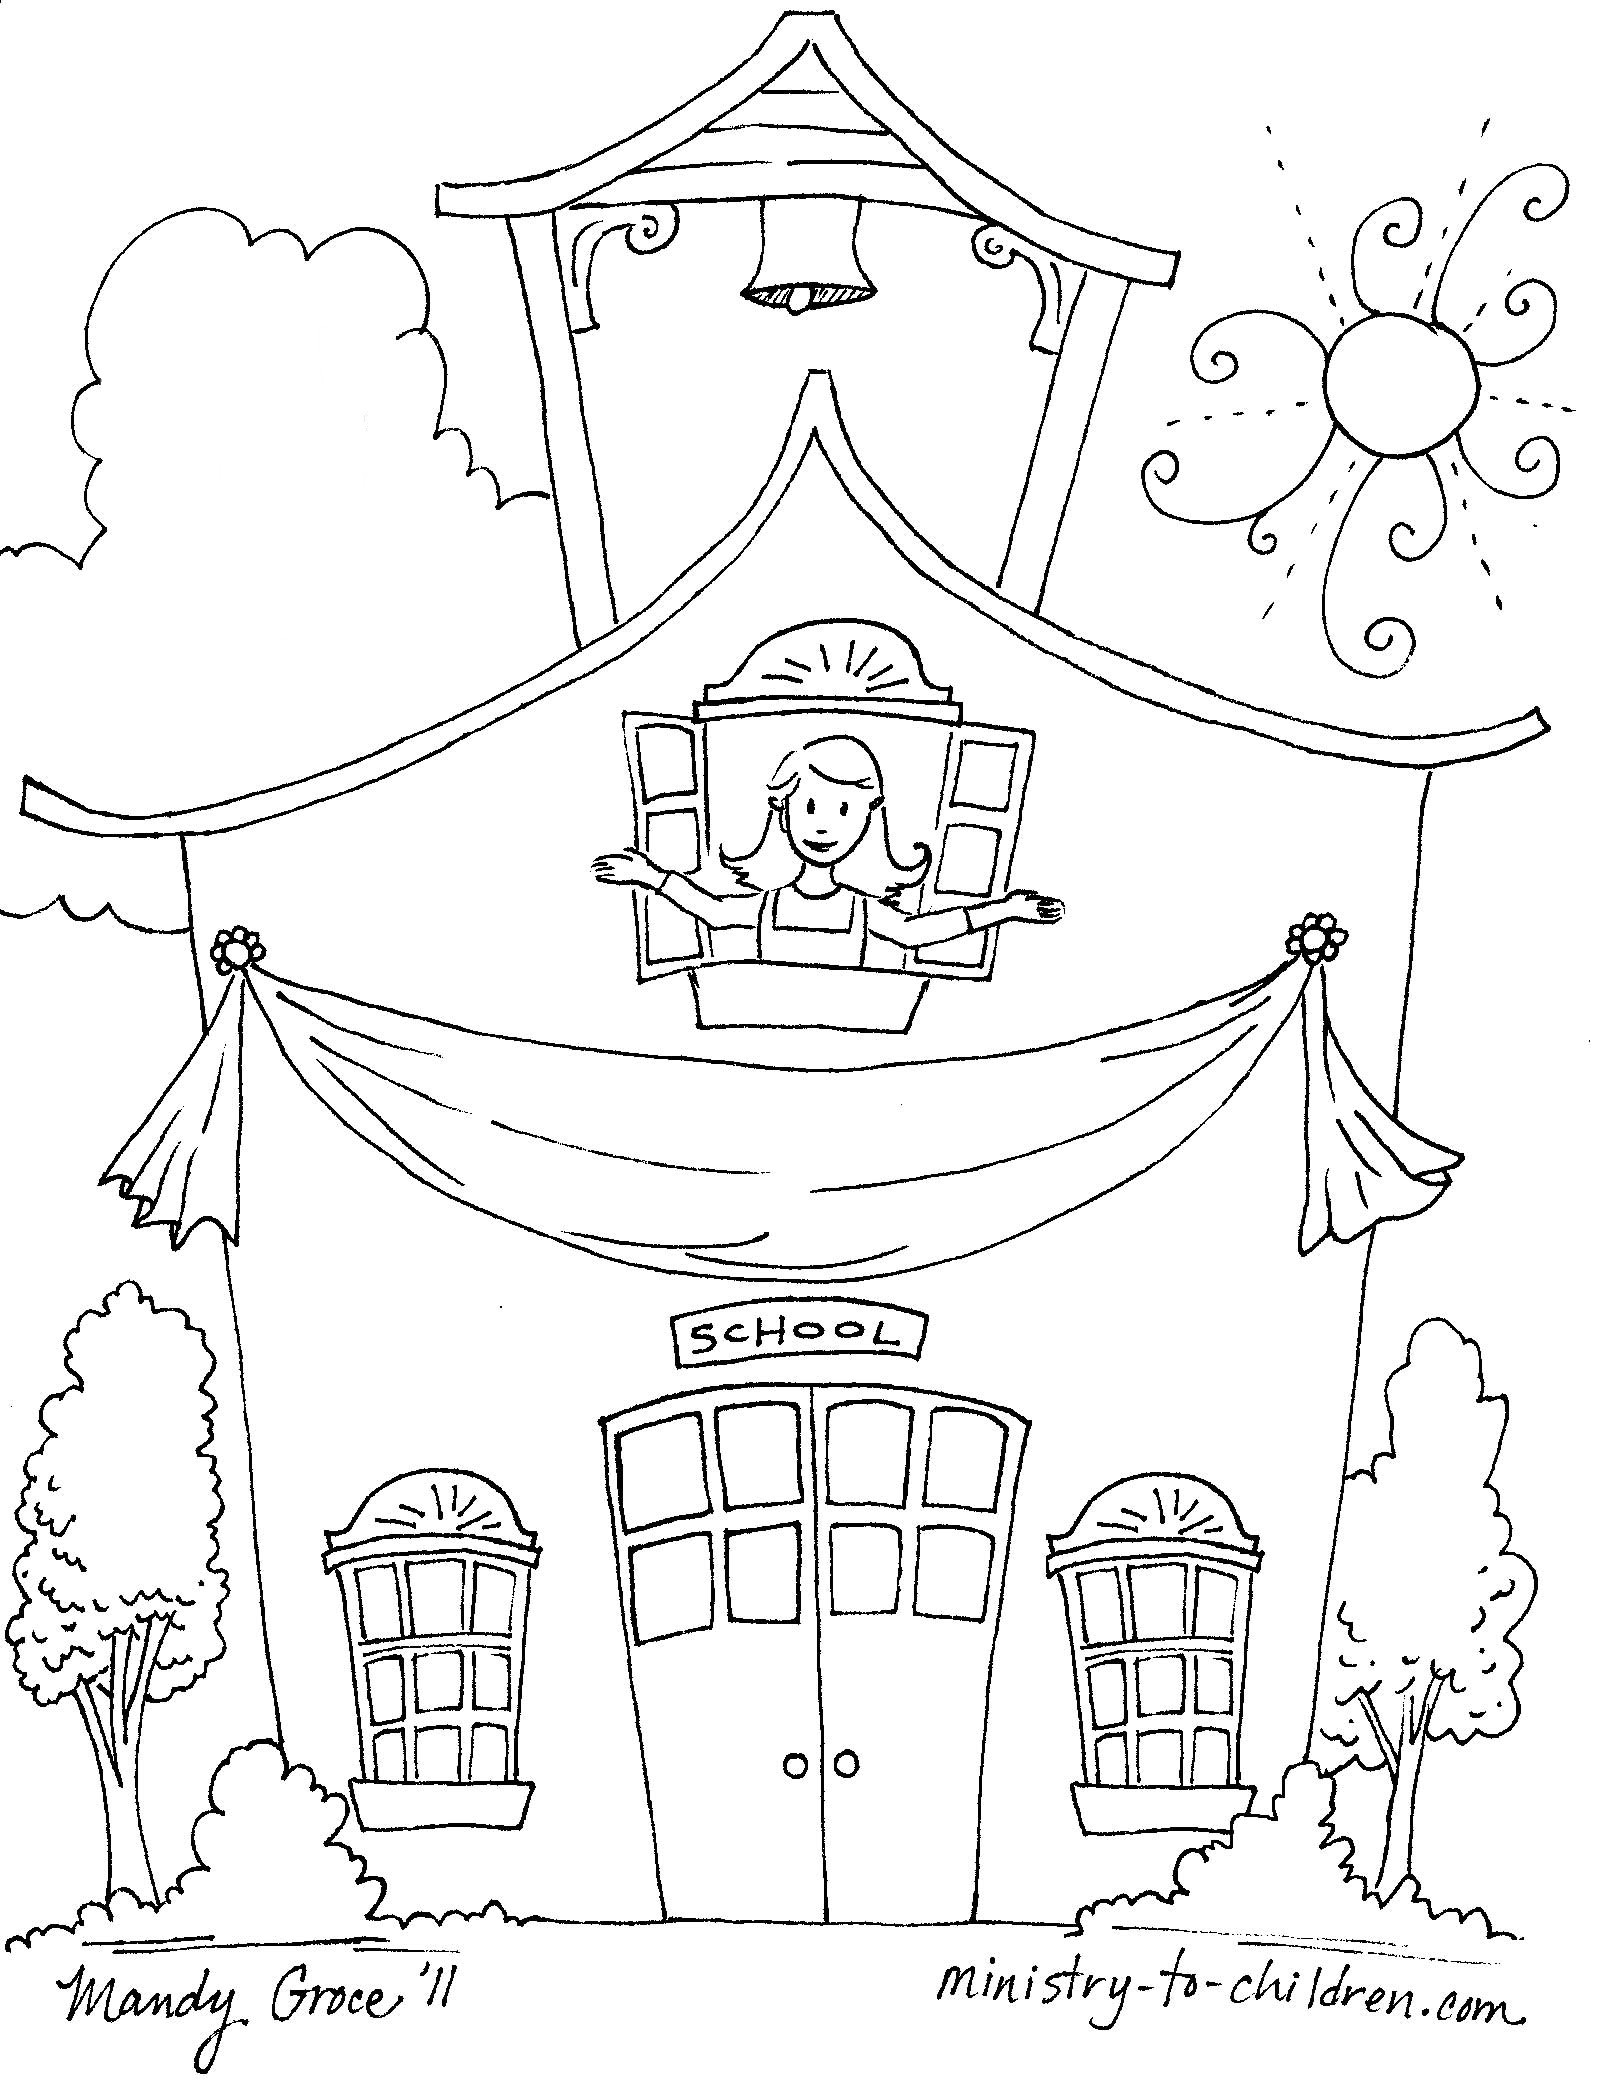 first day of pre k coloring pages